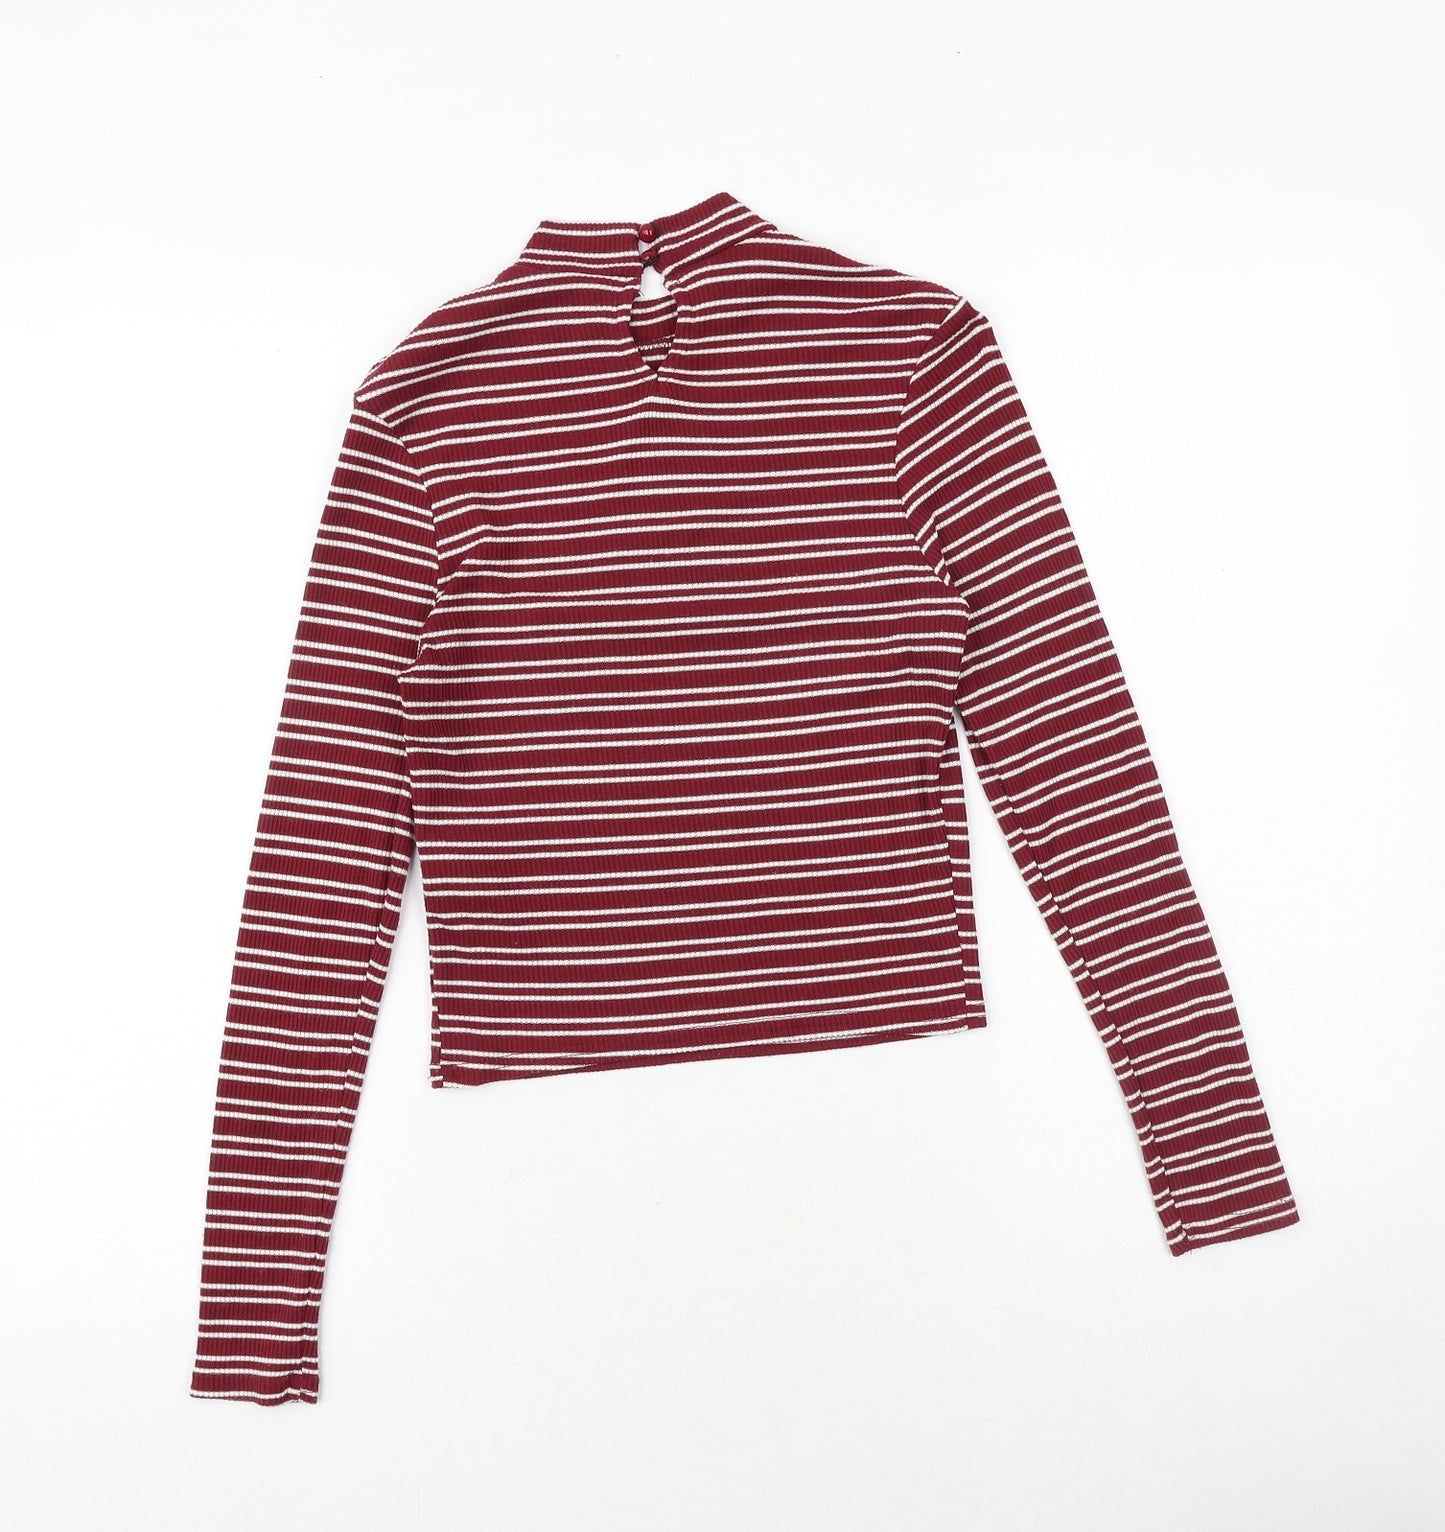 New Look Girls Red Striped Polyester Basic T-Shirt Size 14-15 Years Round Neck Button